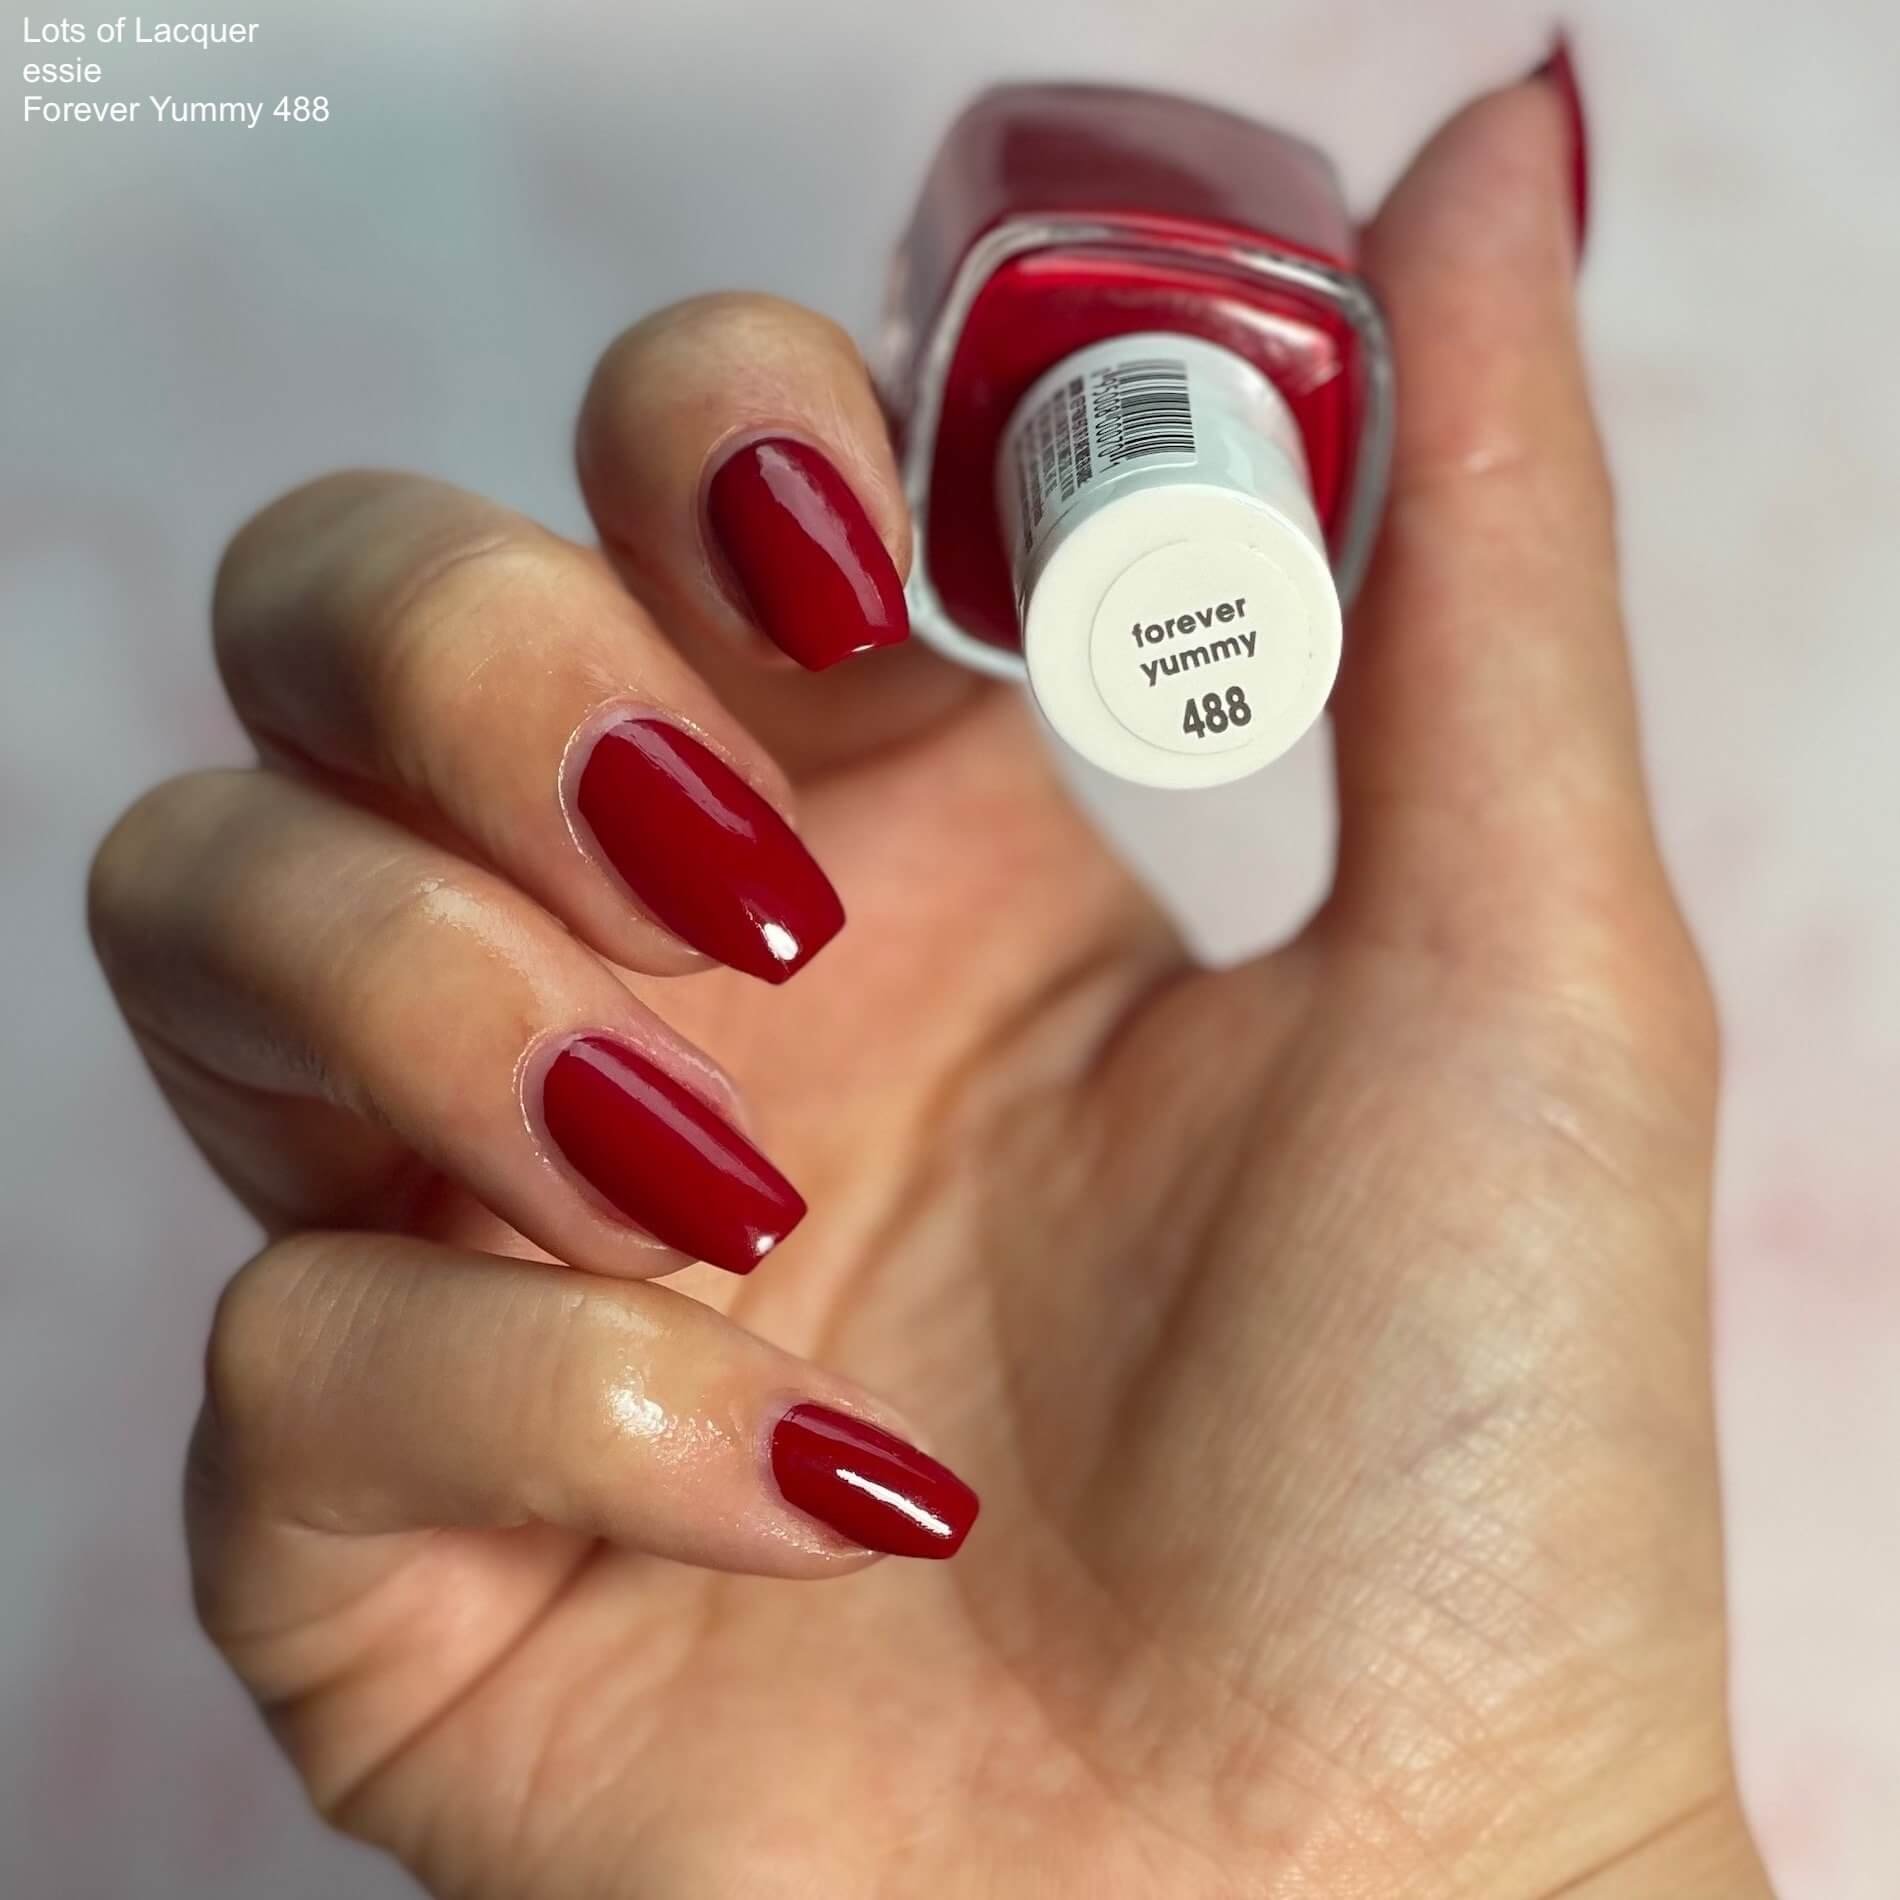 Necessities Blæse Følge efter essie Red Nail Polish — Lots of Lacquer